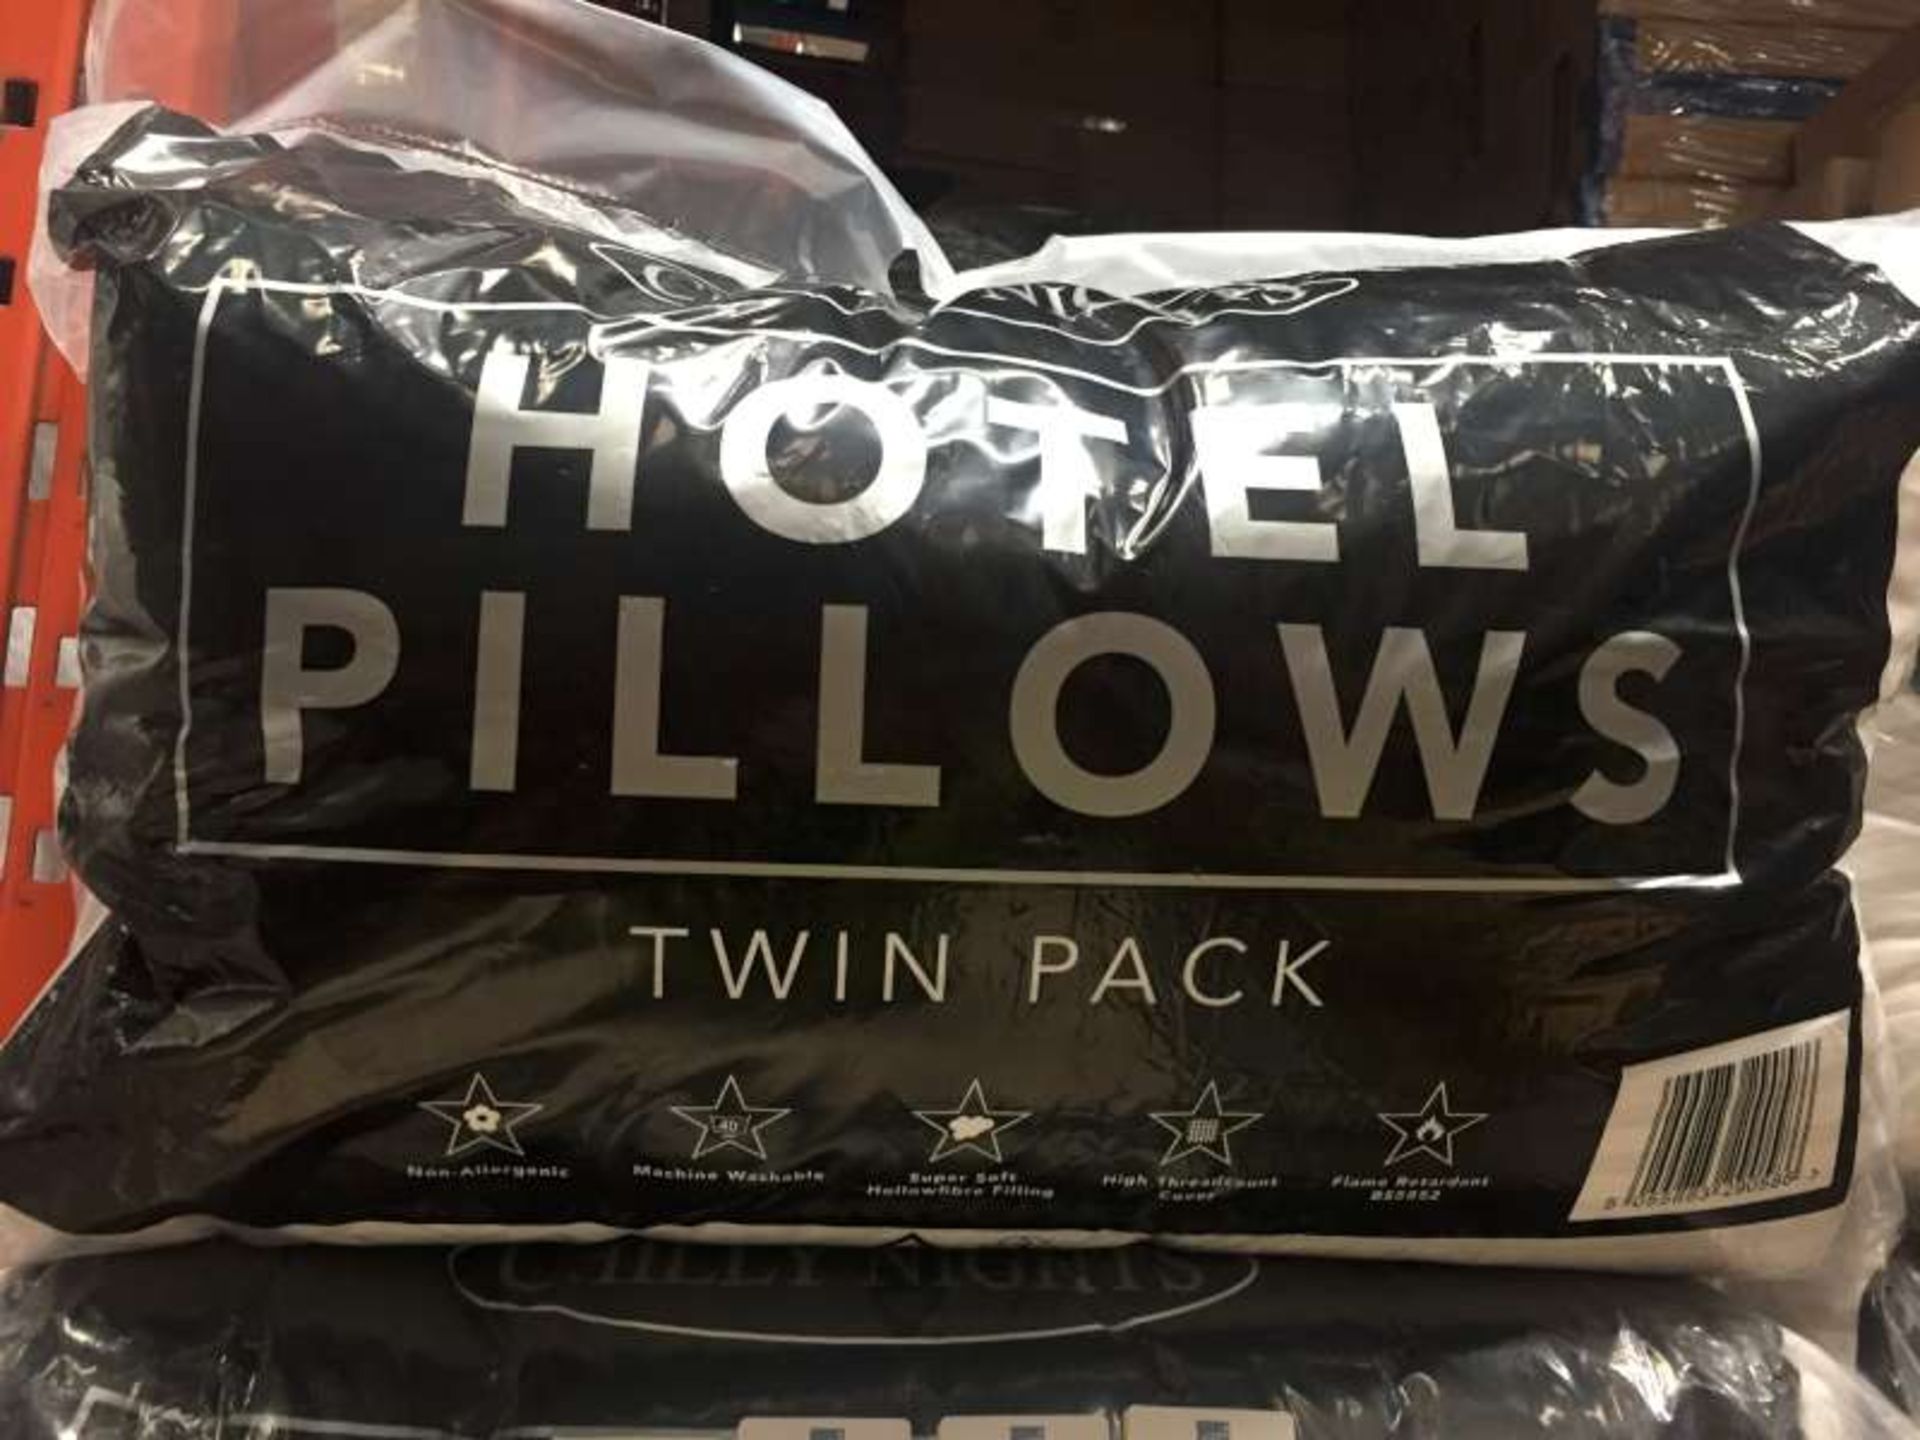 12 X BRAND NEW PACKAGED HOTEL PILLOWS IN 1 BAG